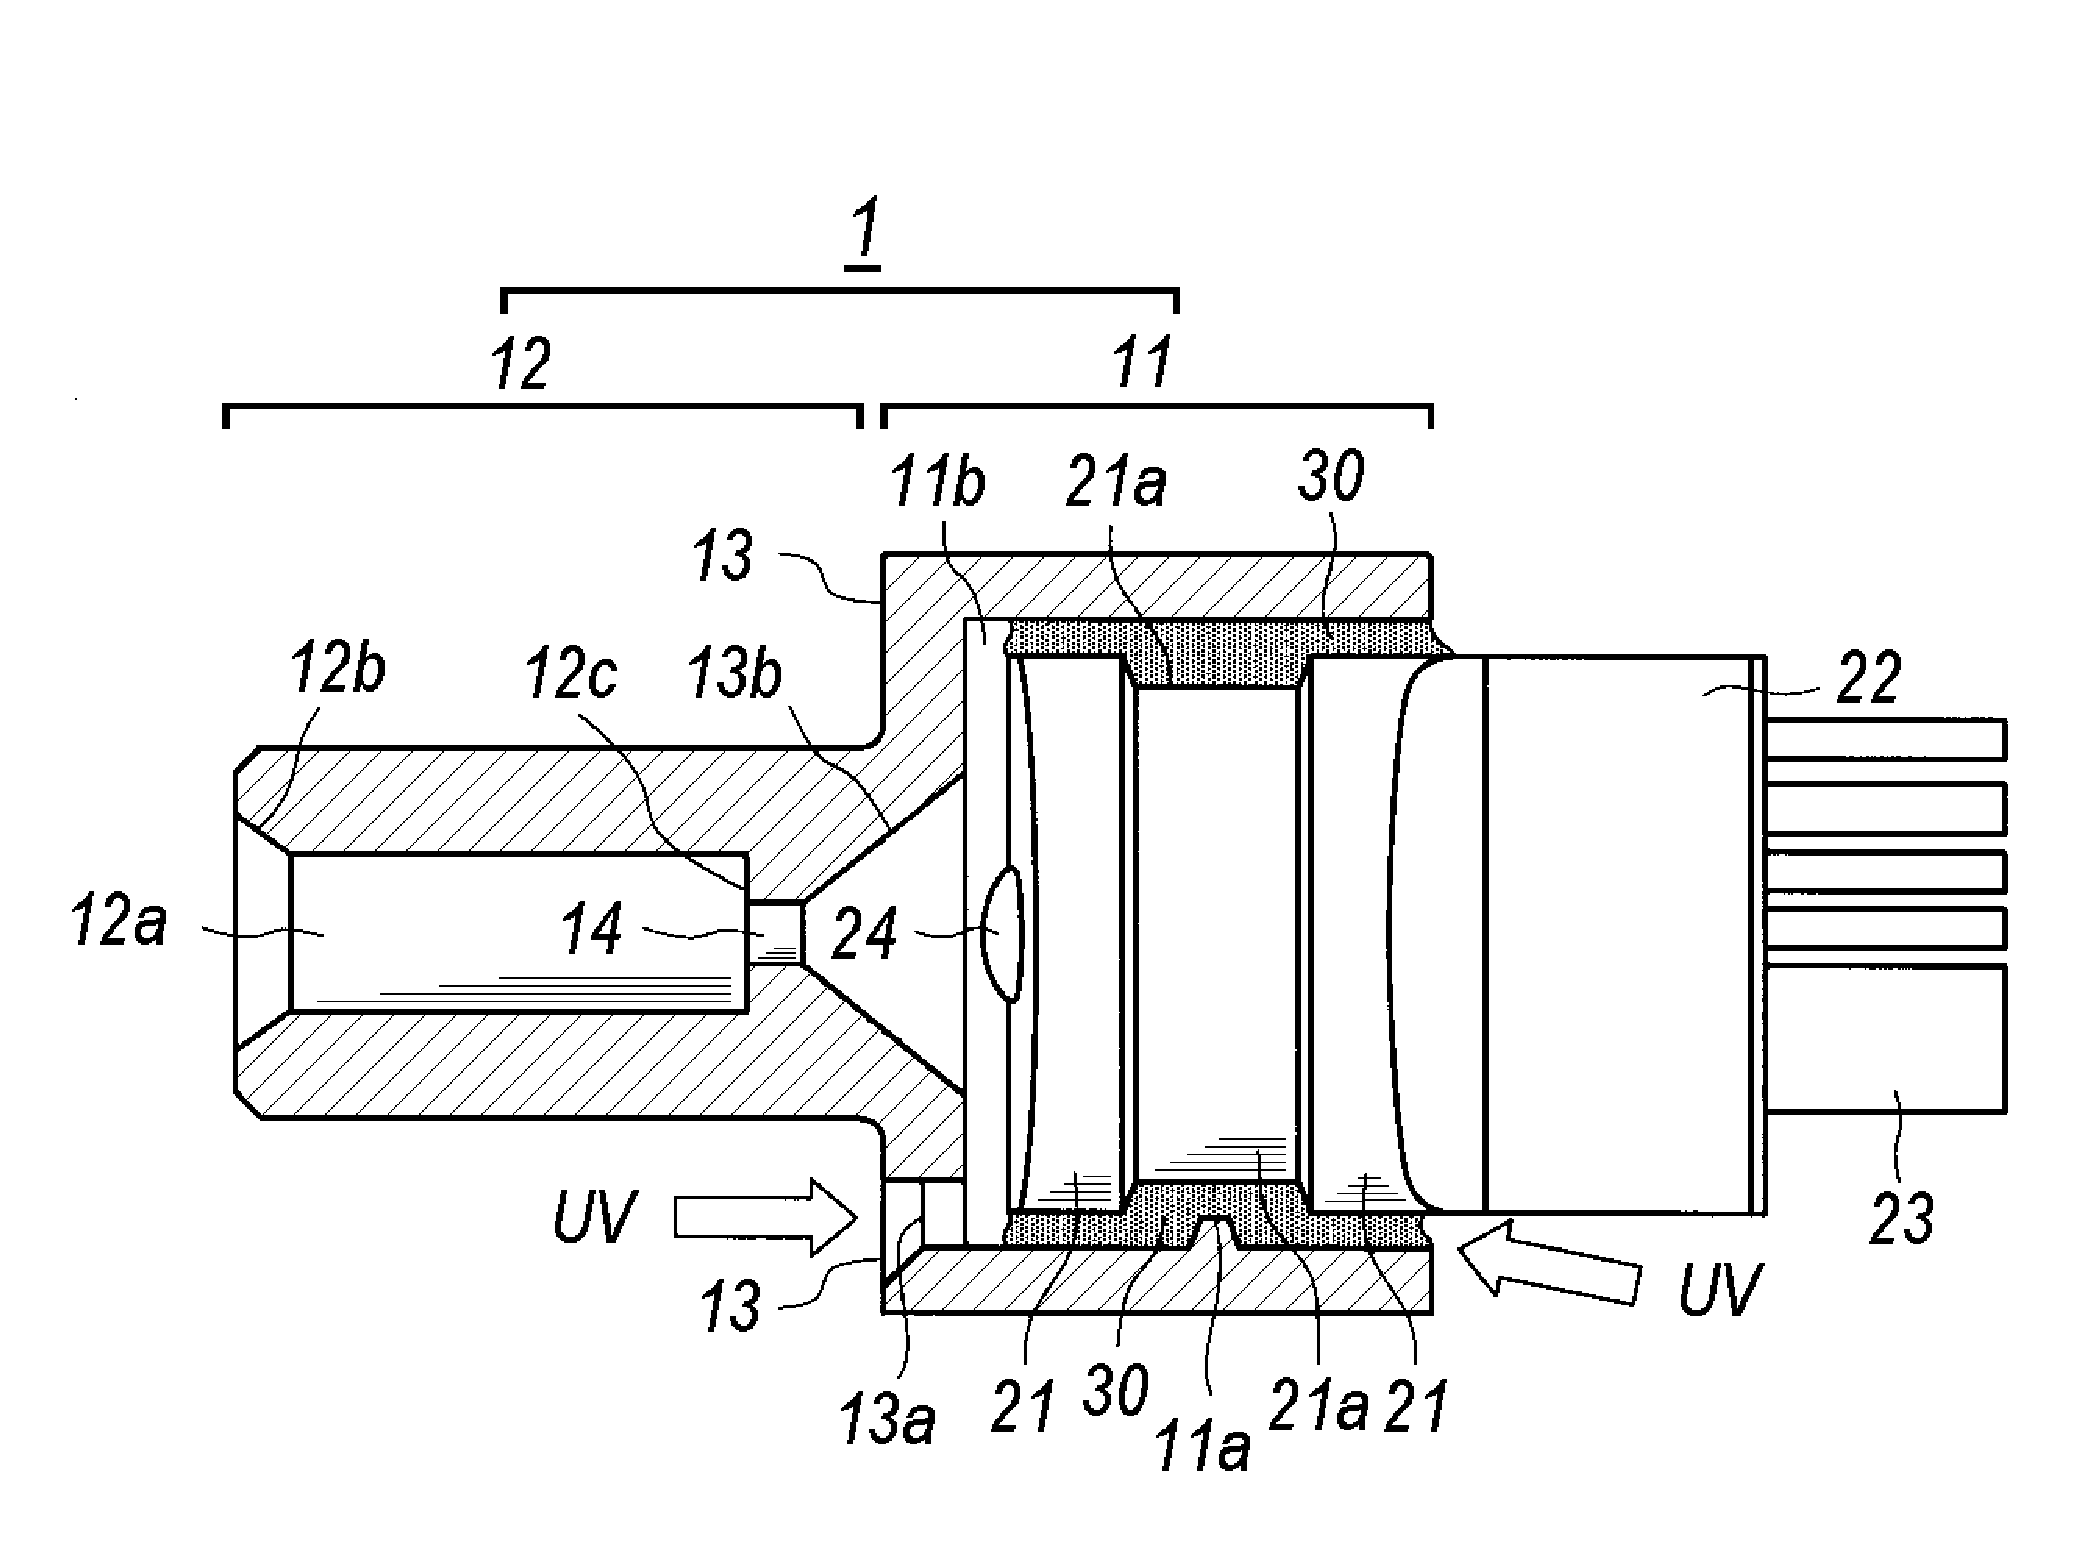 Optical subassembly implementing sleeve and optical device with transparent resin package